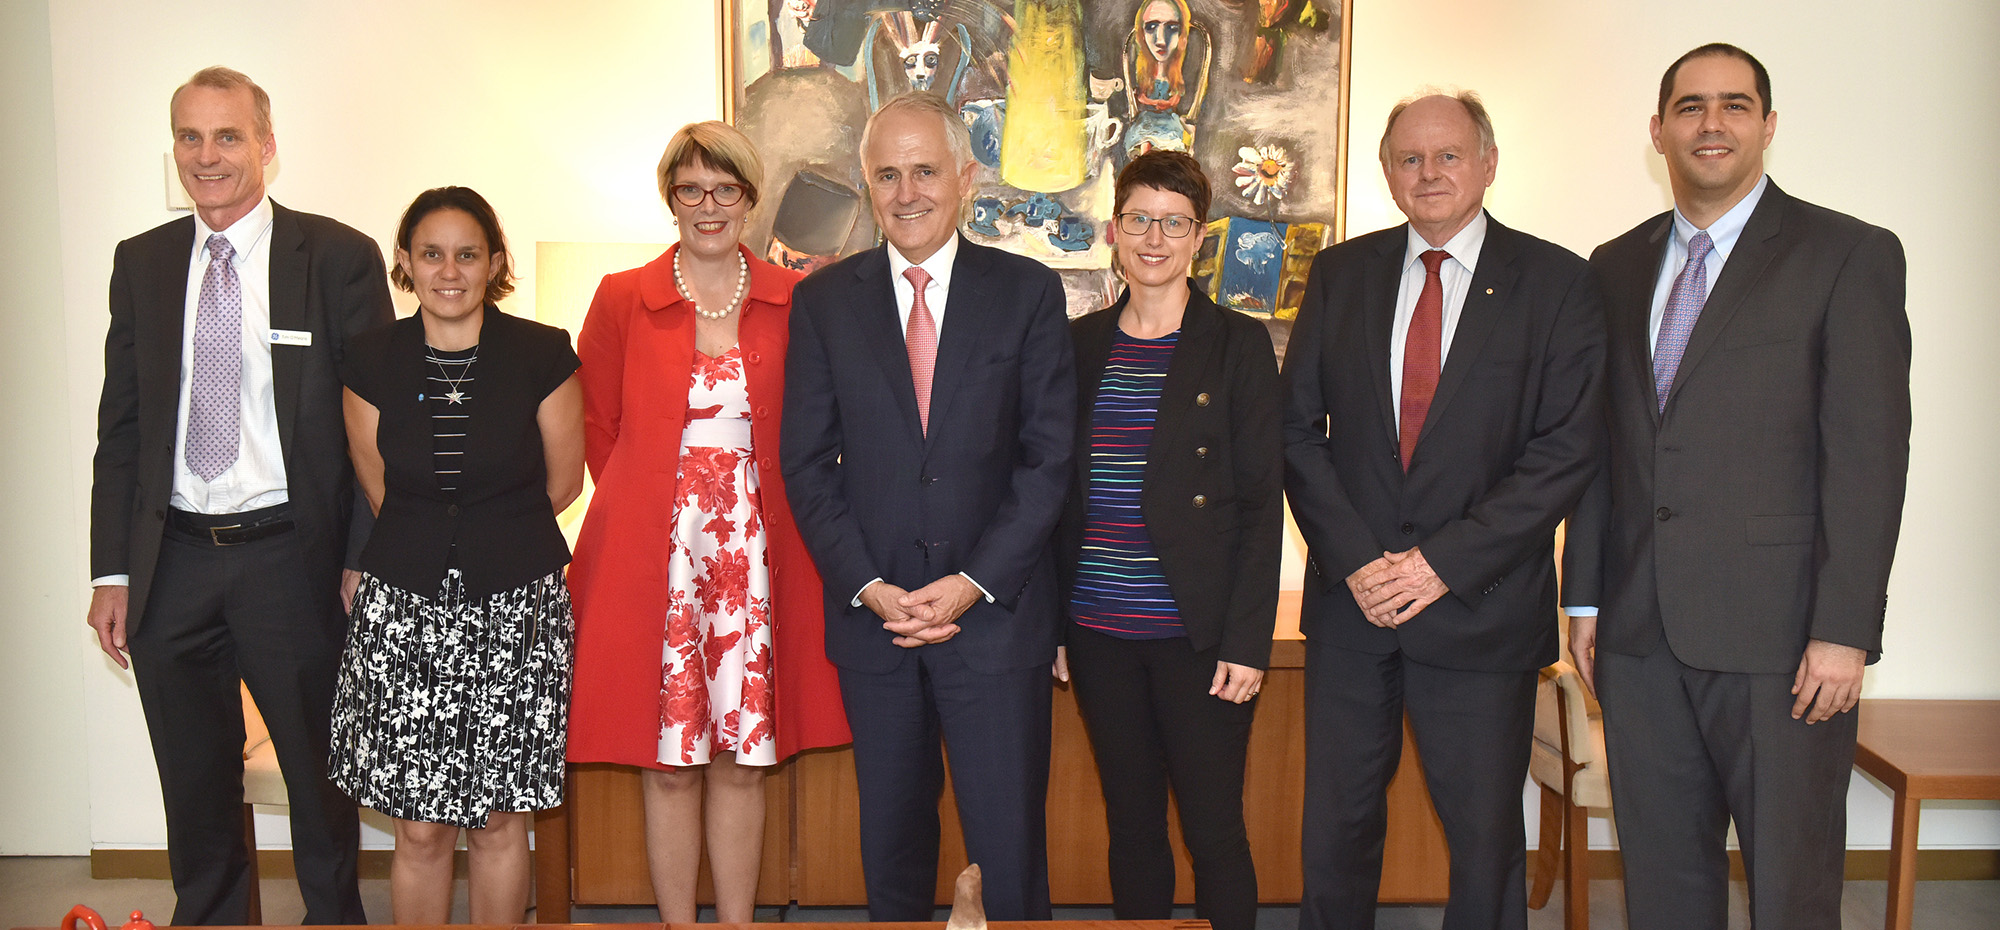 Science meets Parliament, Prime Minister Turnbull with a group of scientists and technologists